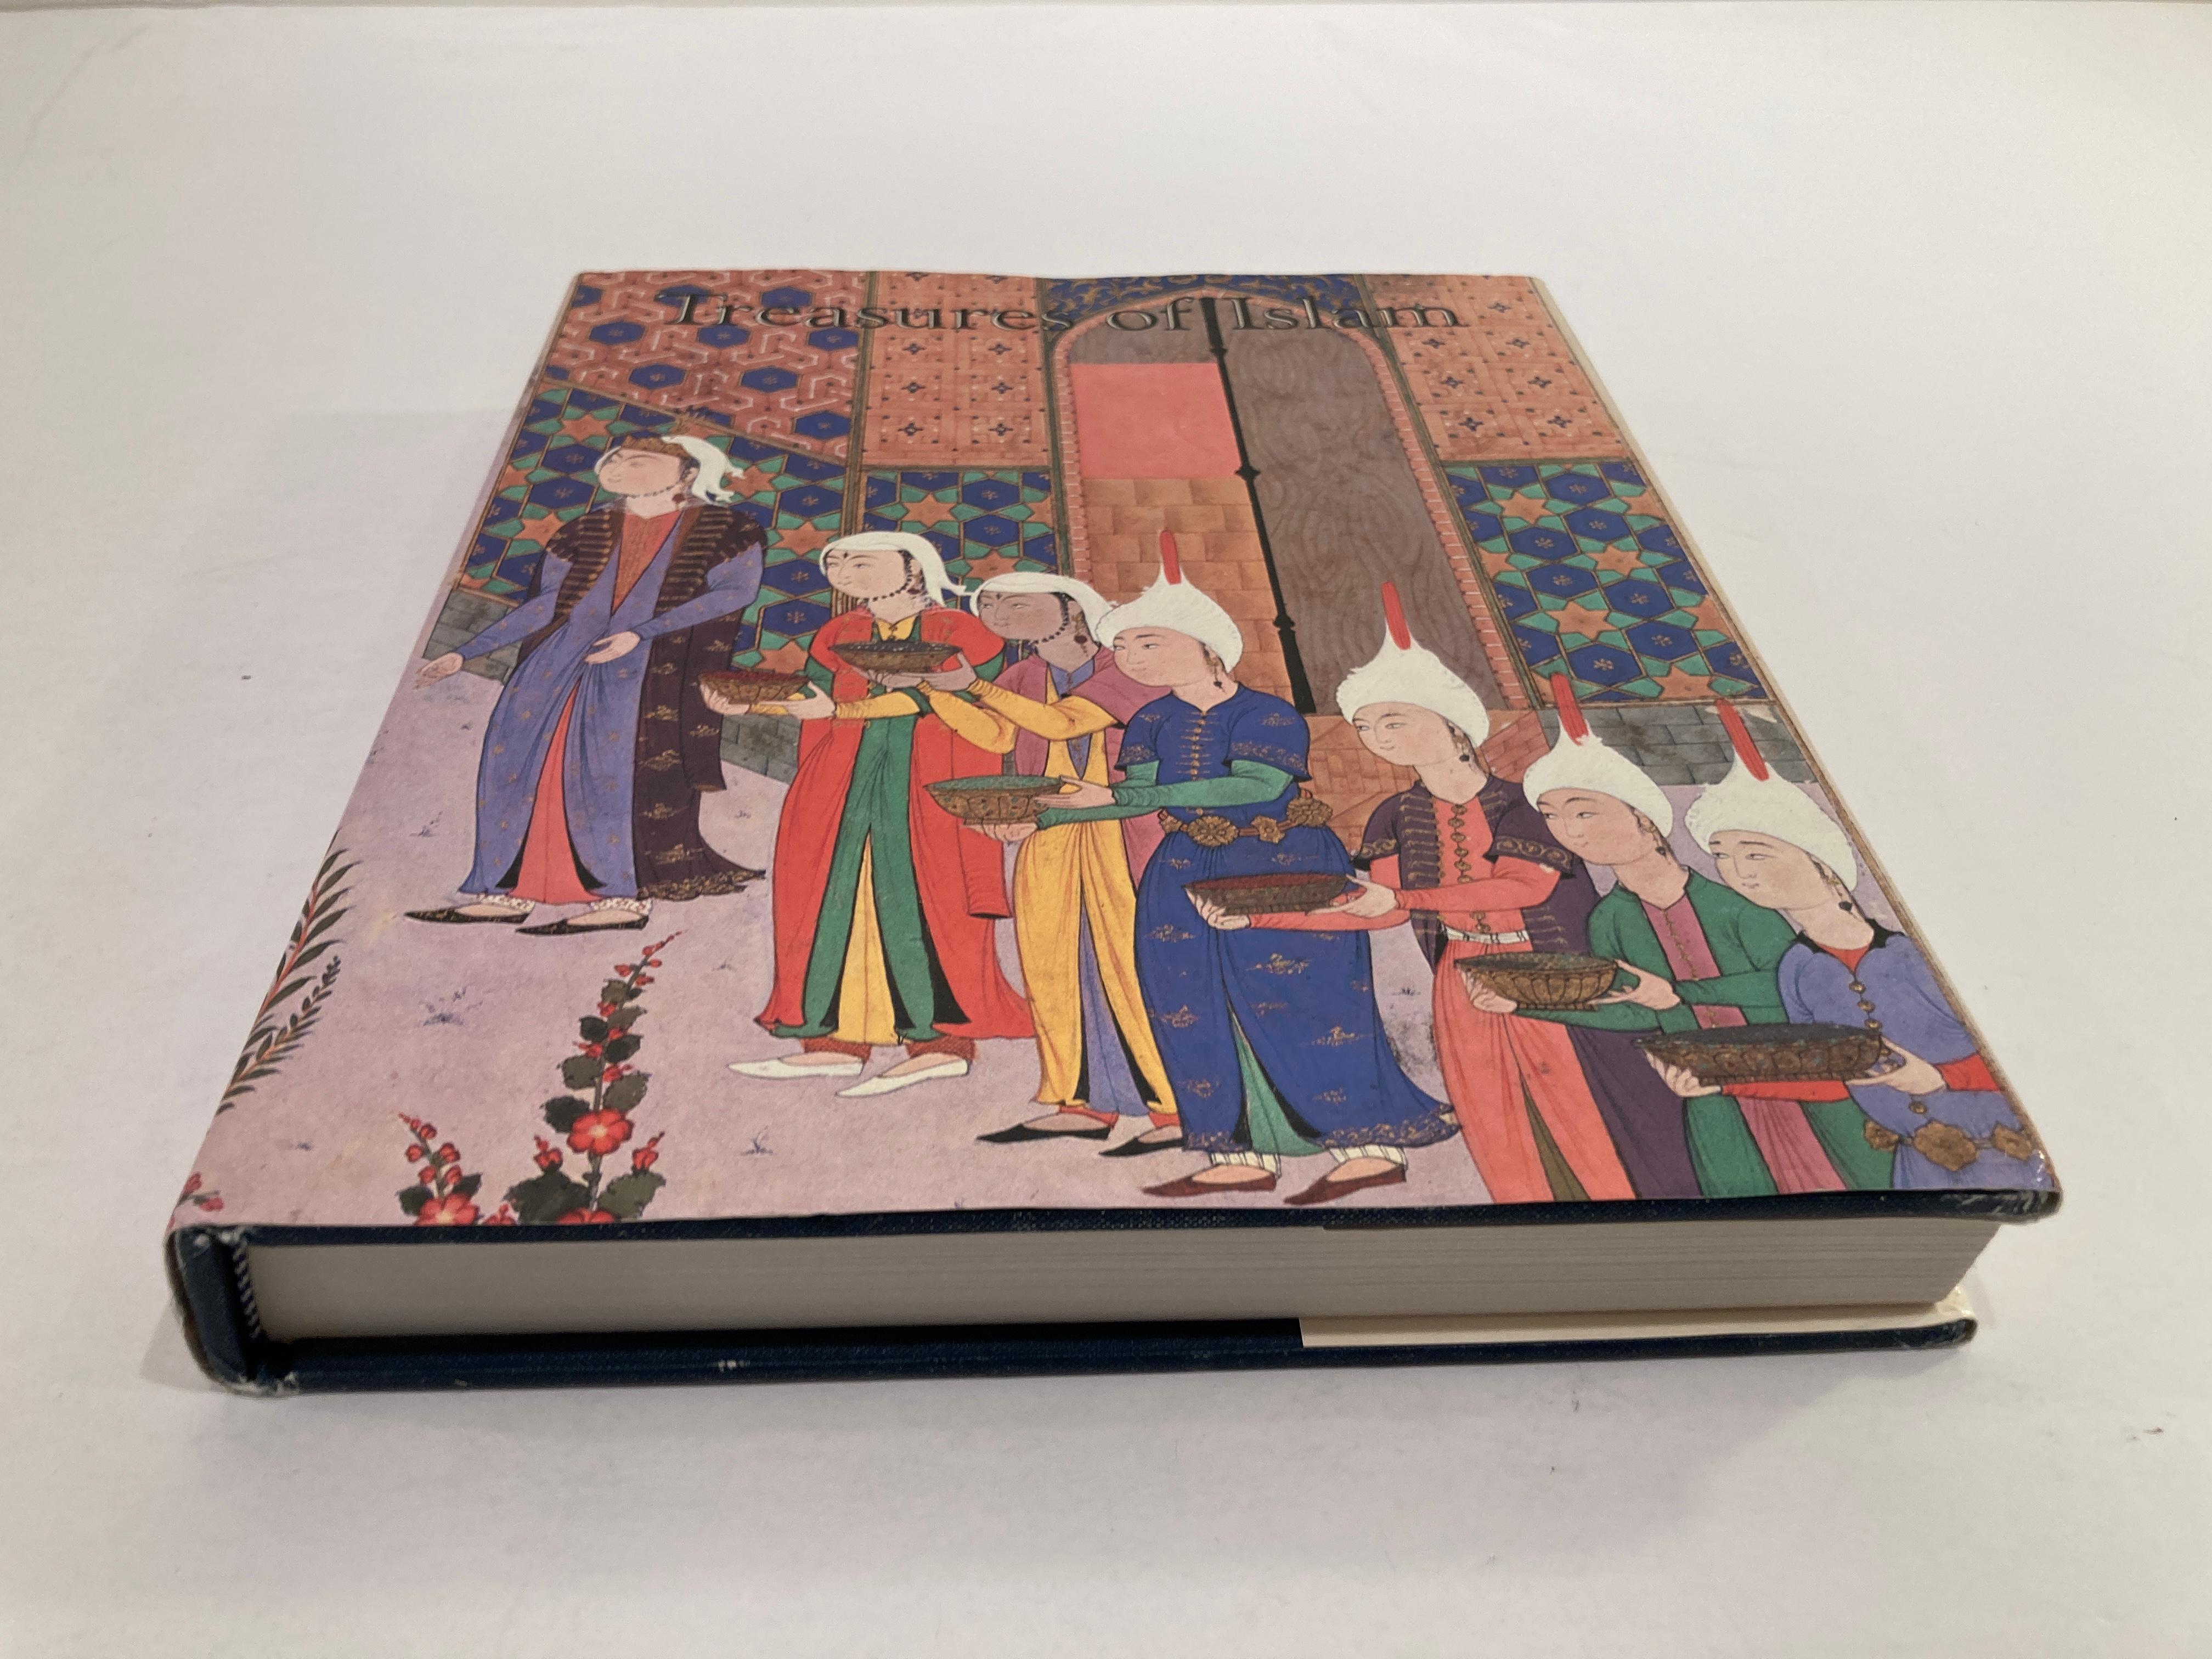 Moorish Treasures of Islam Collectible Art Book by Toby Folk 1985 For Sale